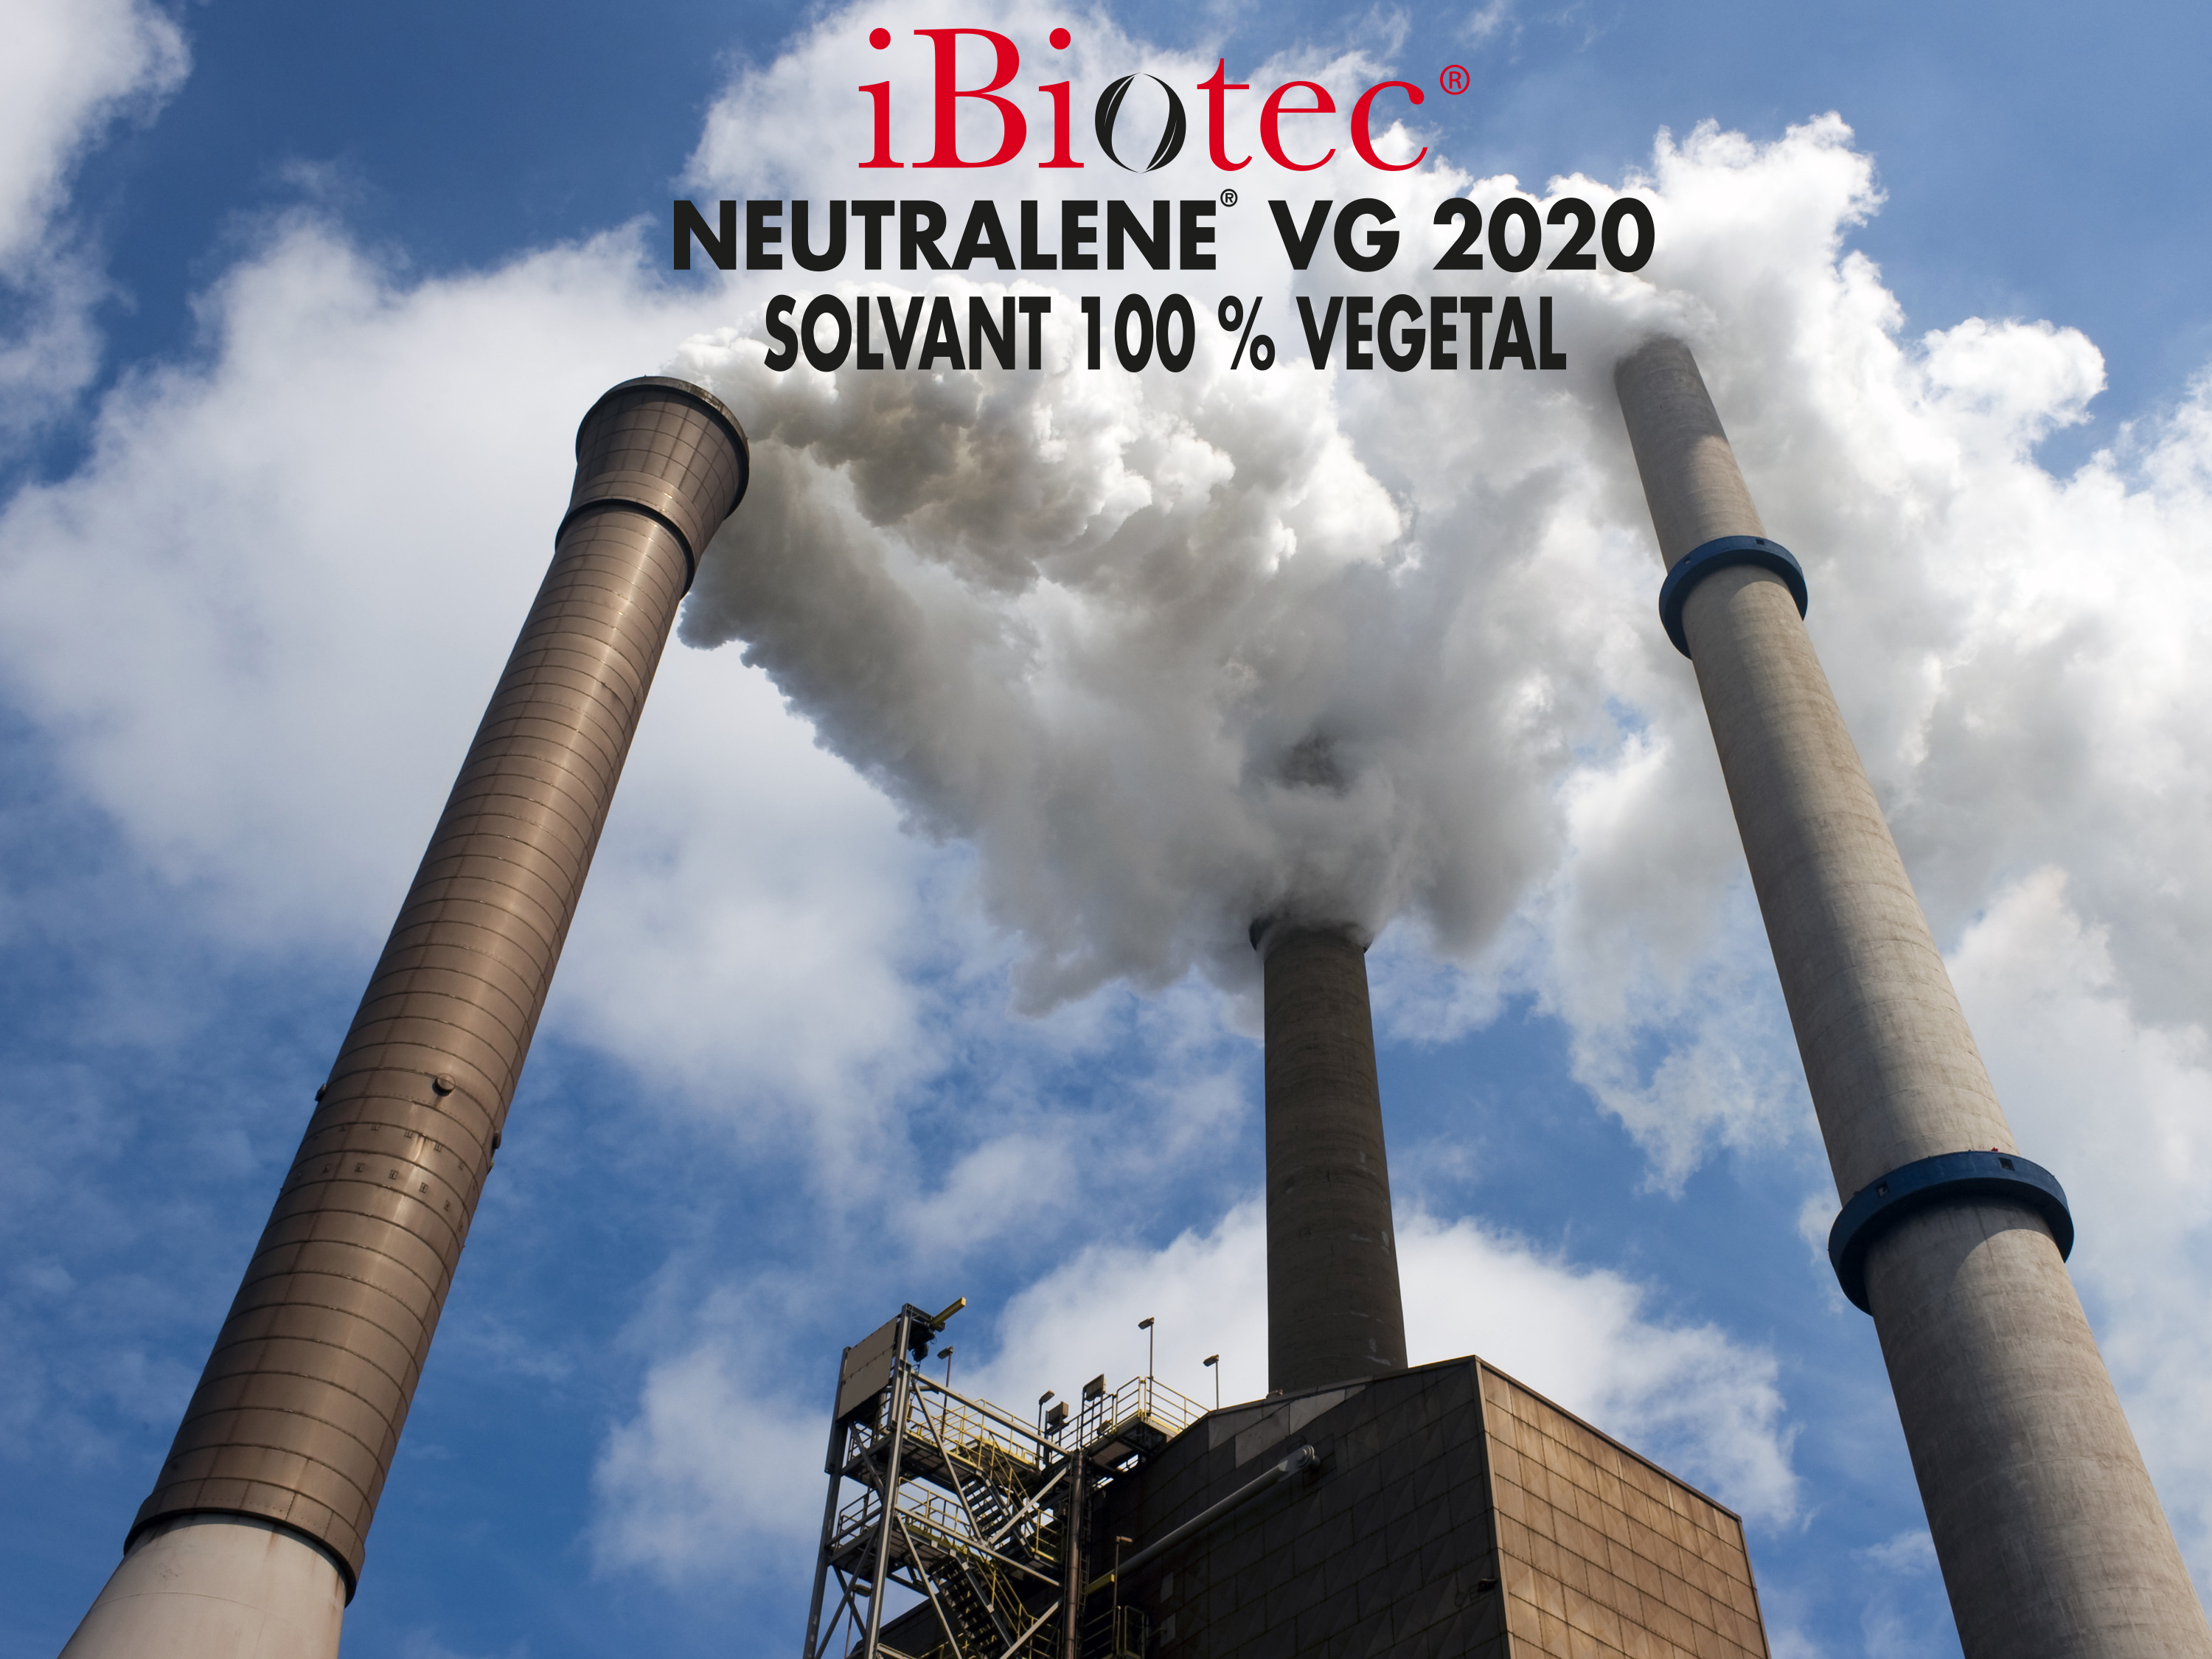 Heavy-duty degreaser and cleaner. Future Safe green solvent. 100% vegetal solvent. non-hazardous GHS compliance solvent. biodegradable OECD solvent. VOC free solvent. VOC exempt solvent. Alternative solvent. Bio based solvent. Nonflammable solvent. Environmentally friendly solvent. Non-hazardous  CLP compliance solvent. No emission solvent. IED directive. No pollution solvent. IPPC integrated pollution prevention and control. bio based solvent. industrial cleaner manufacturer. Industrial degreaser manufacturer. Industrial degreaser supplier. Industrial cleaner supplier.OBN solvent. New solvent technology. Rig wash. oil and gas mro. Oil and gas maintenance.